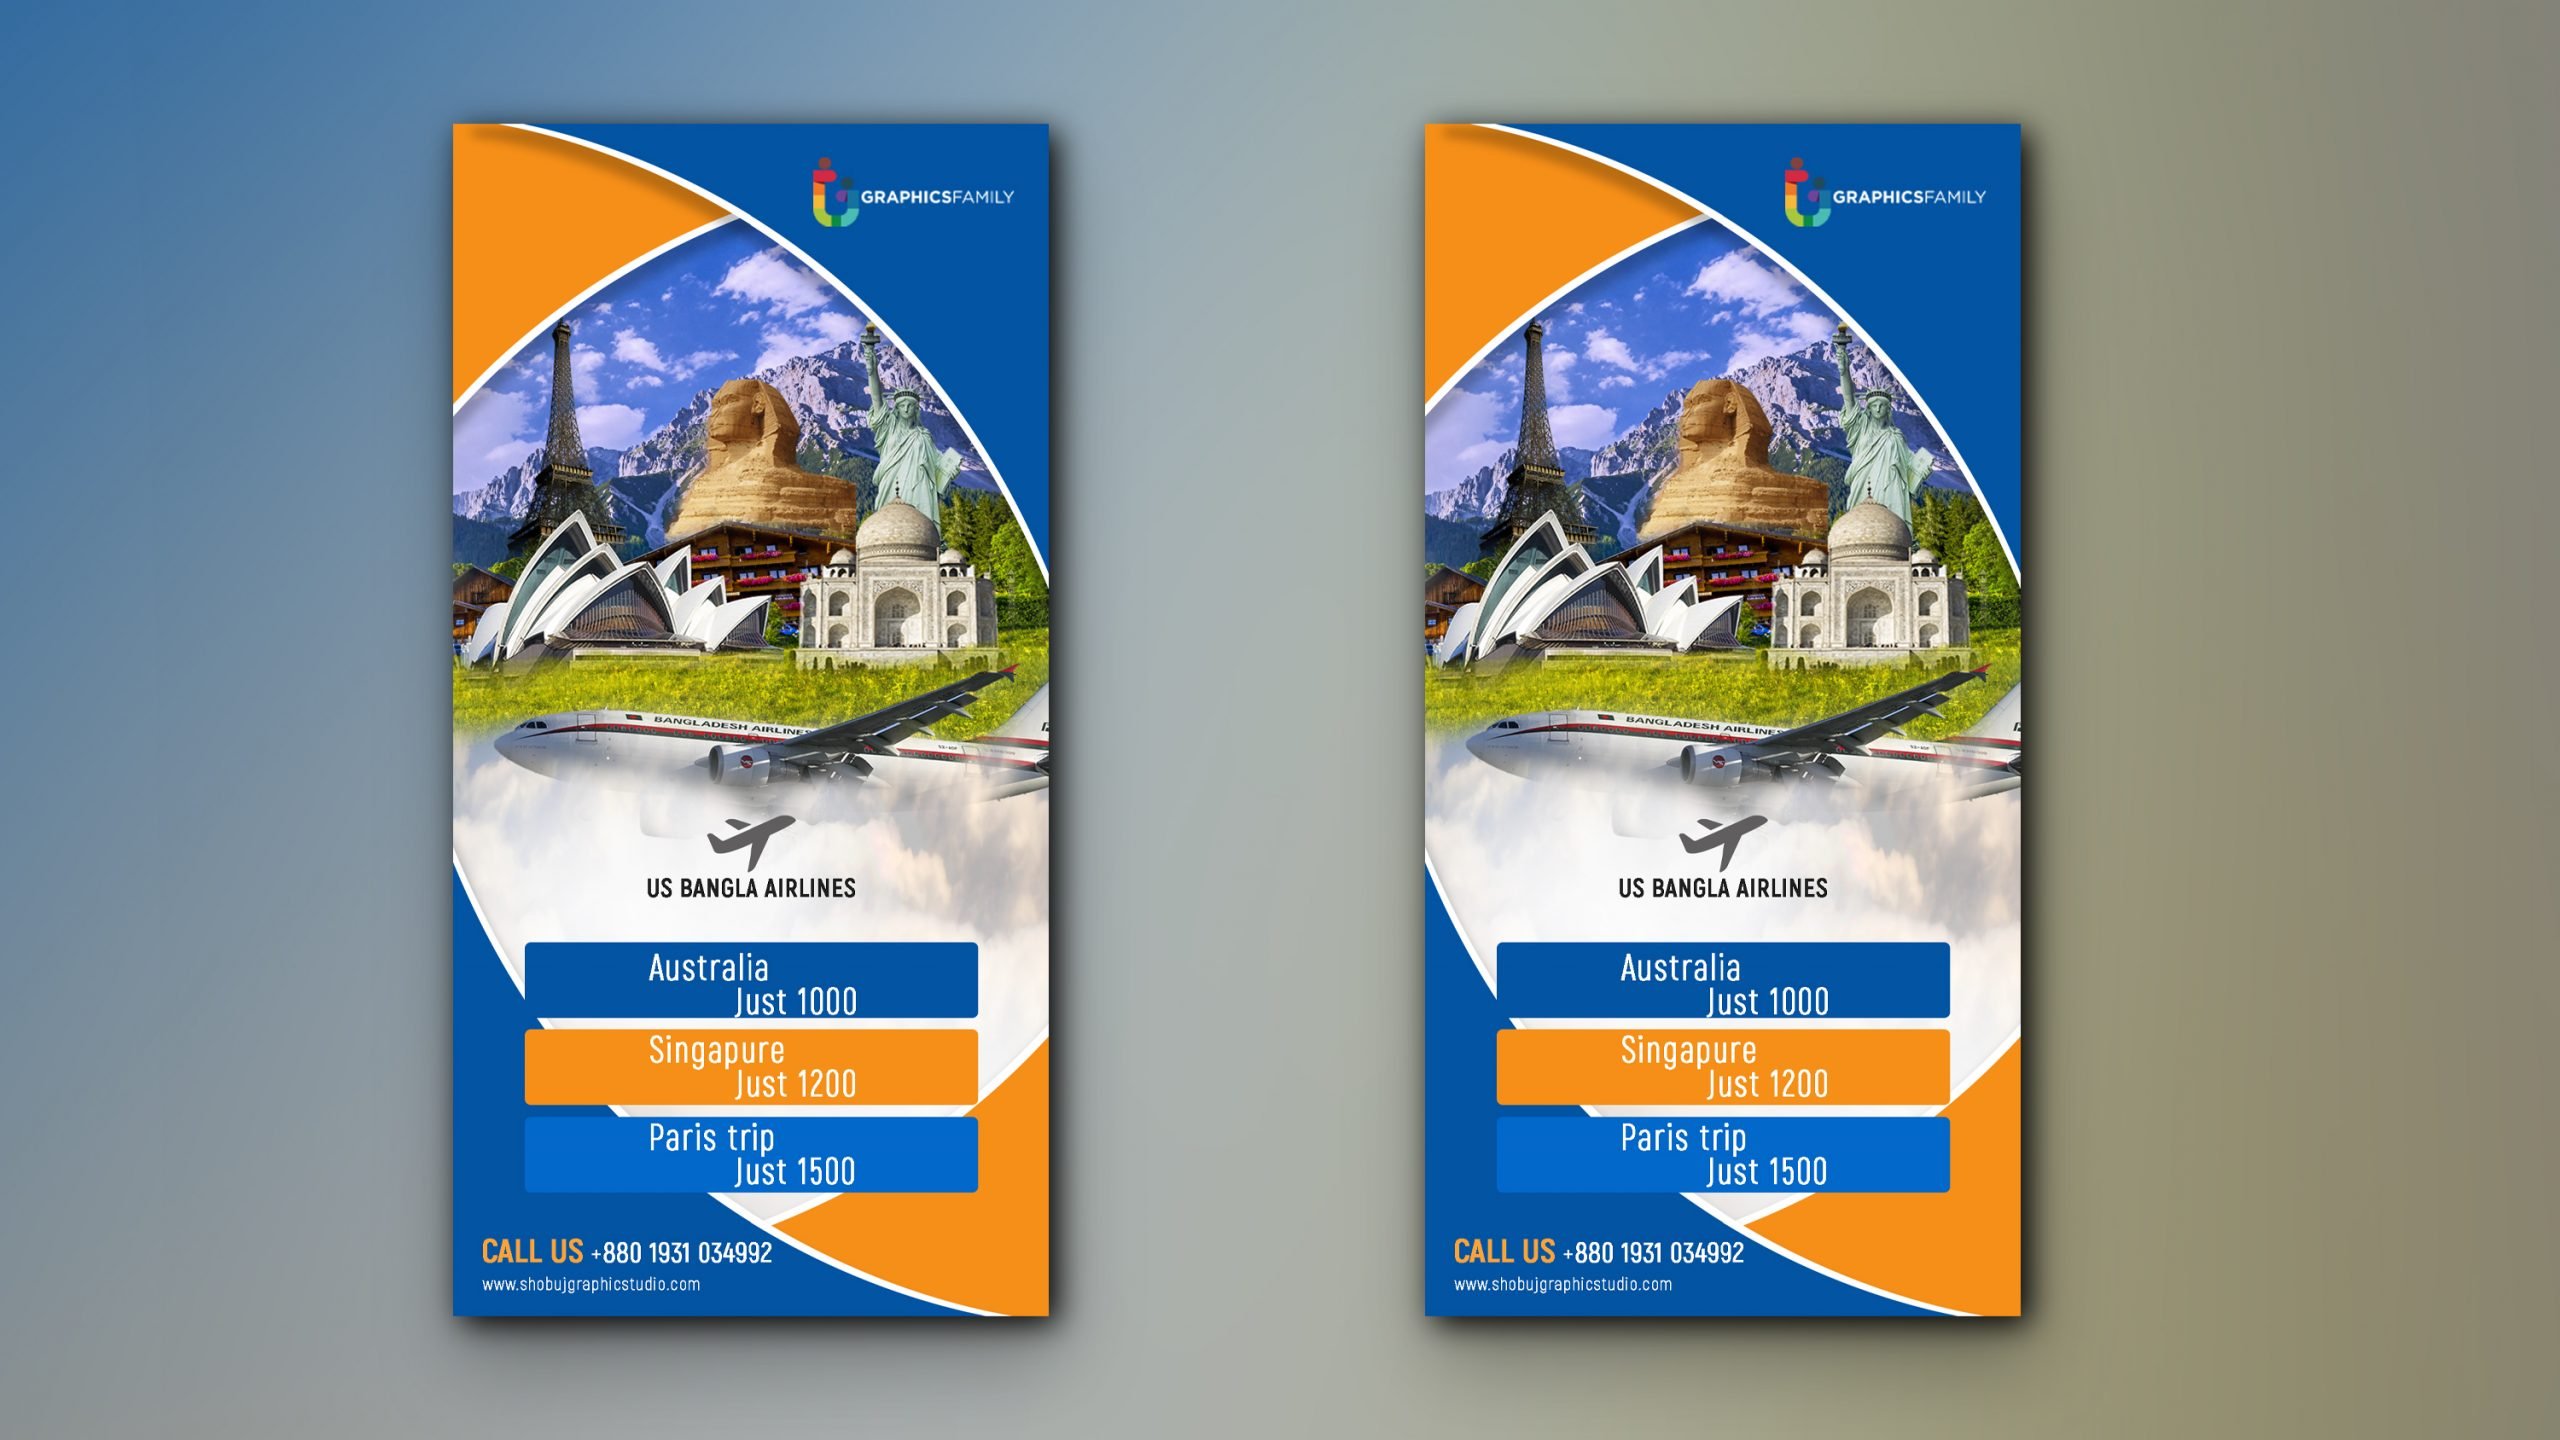 Travel Agency Banner Design Template Free psd â€“ GraphicsFamily